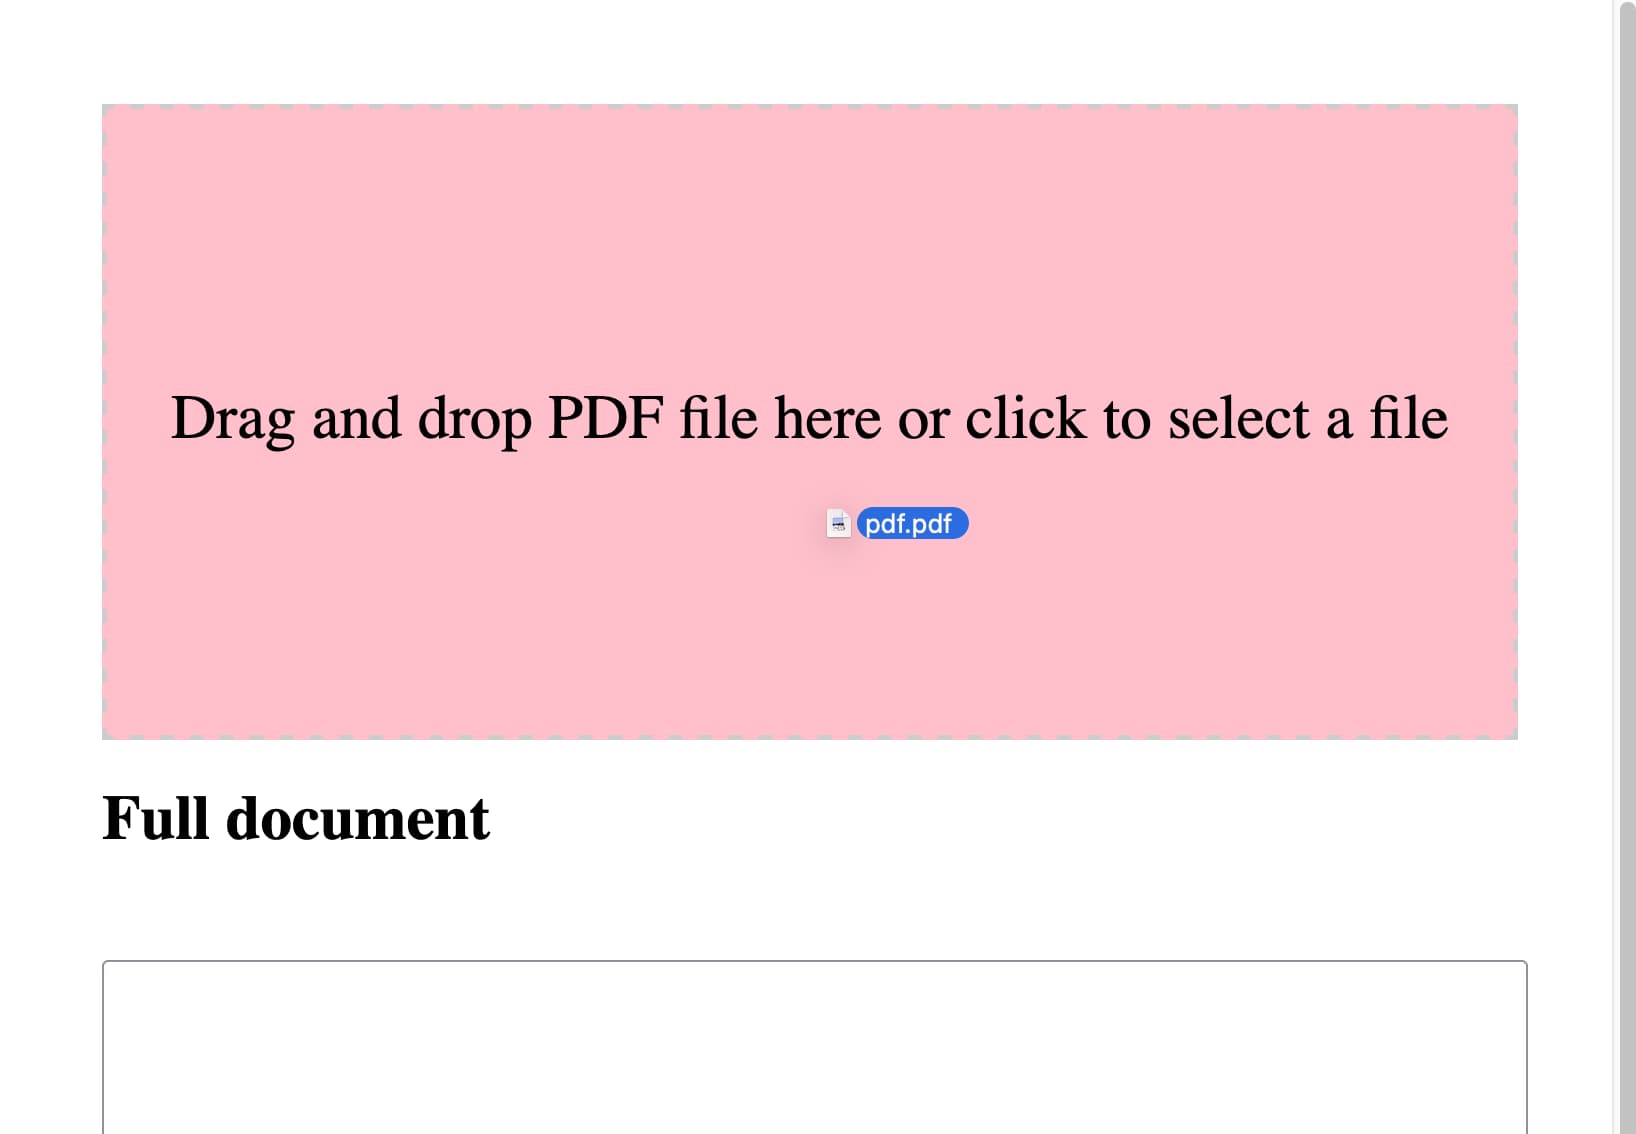 A PDF file is dragged over the box and it turned pink. The heading Full document displays below